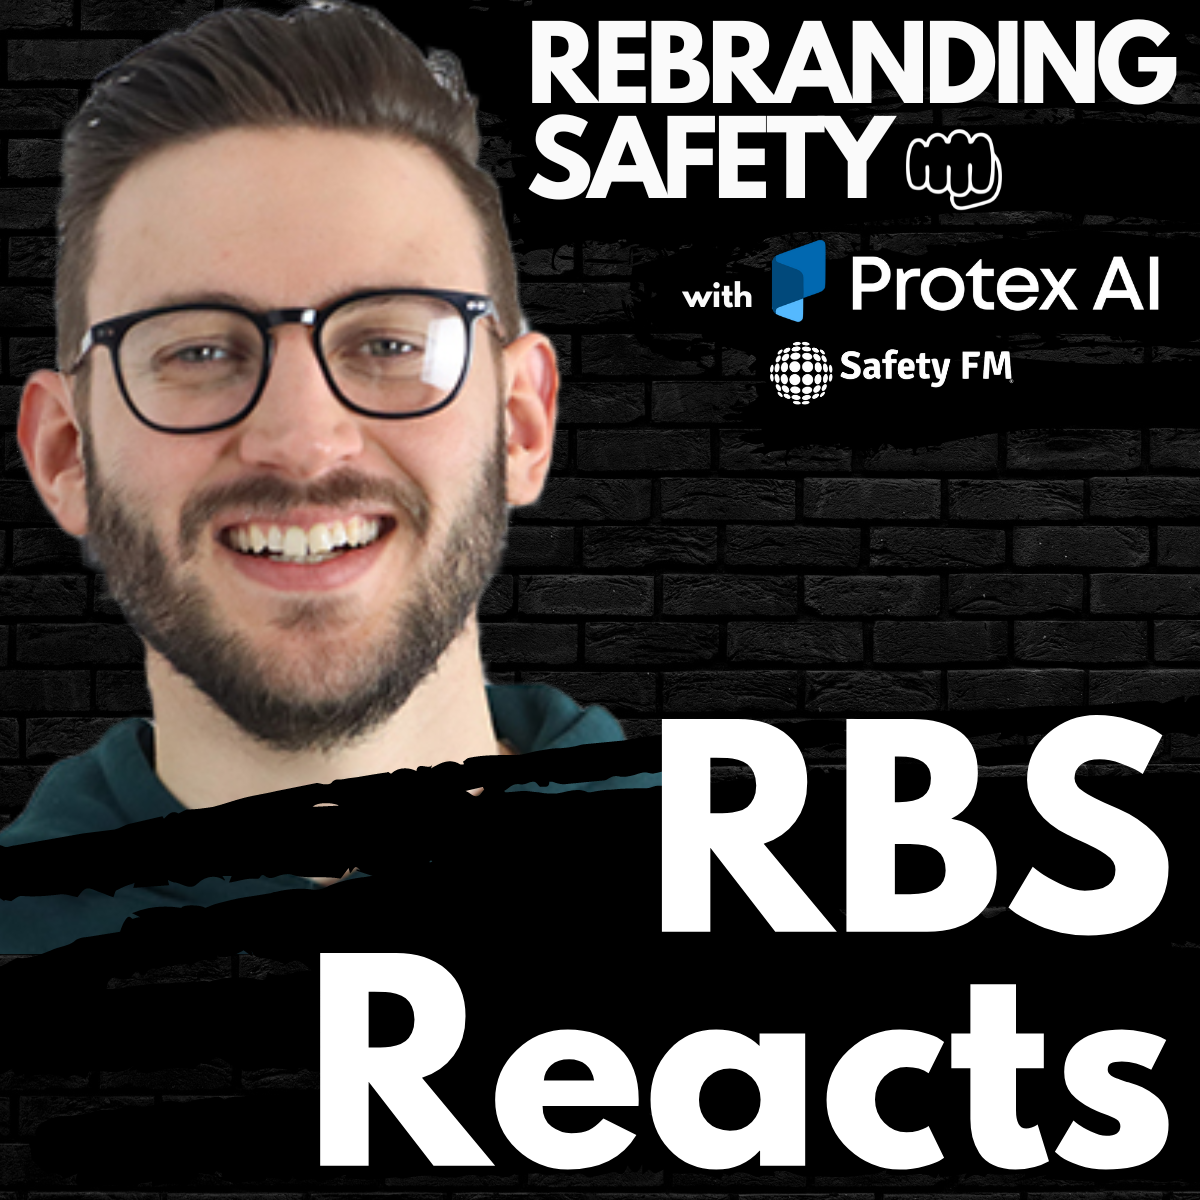 Rebranding Safety REACTS - Episode 5 - 